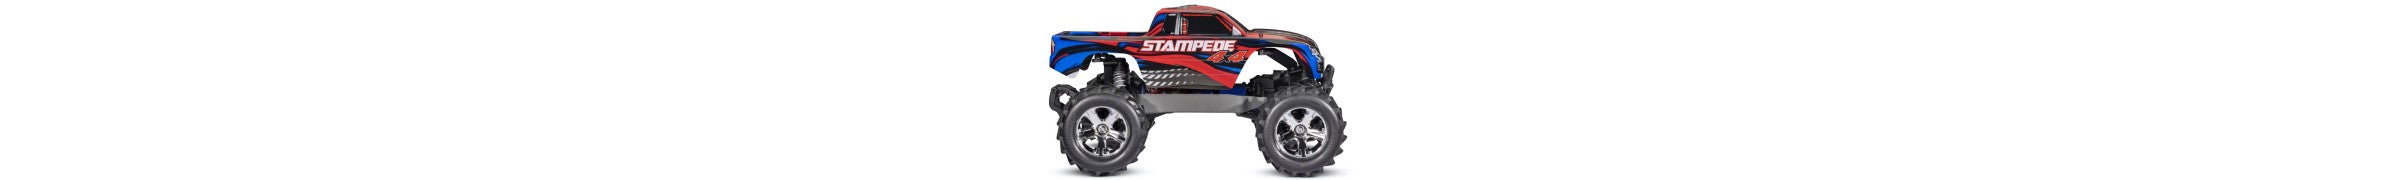 Parts For 67054-61 Traxxas Stampede 4WD 1/10 XL-5 Monster Truck with LED Lighting